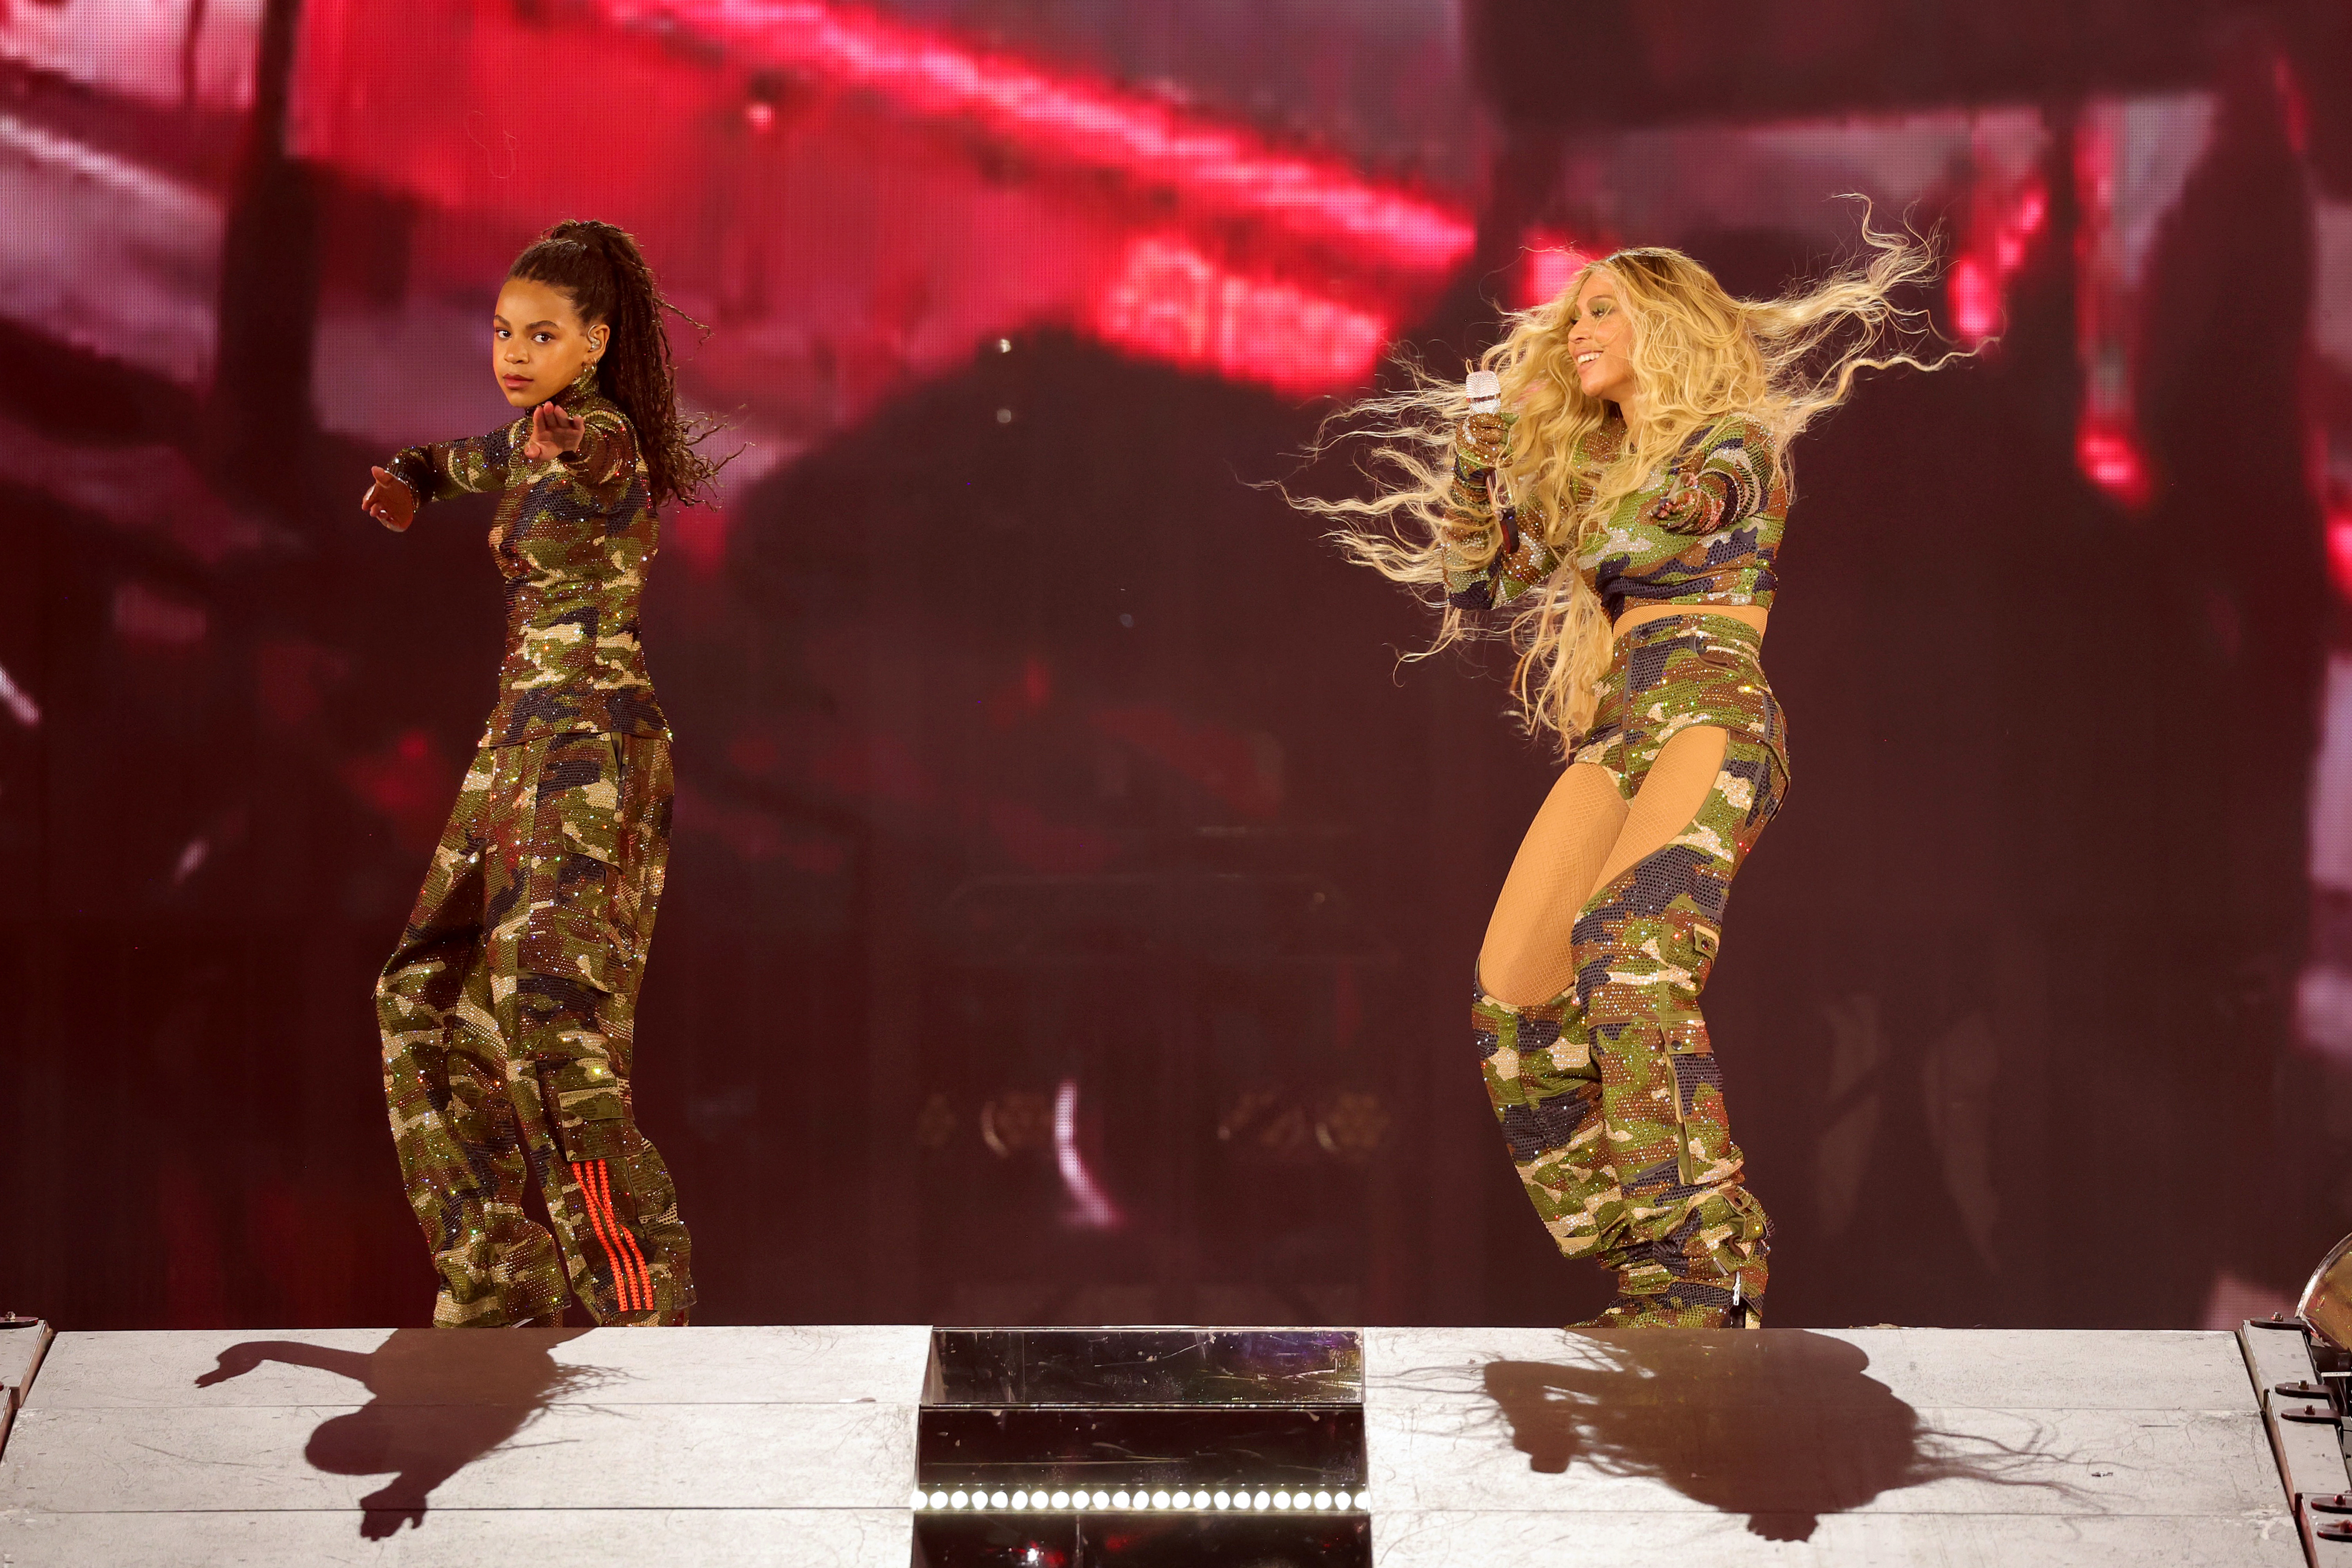 Blue and Beyoncé two dancing on stage